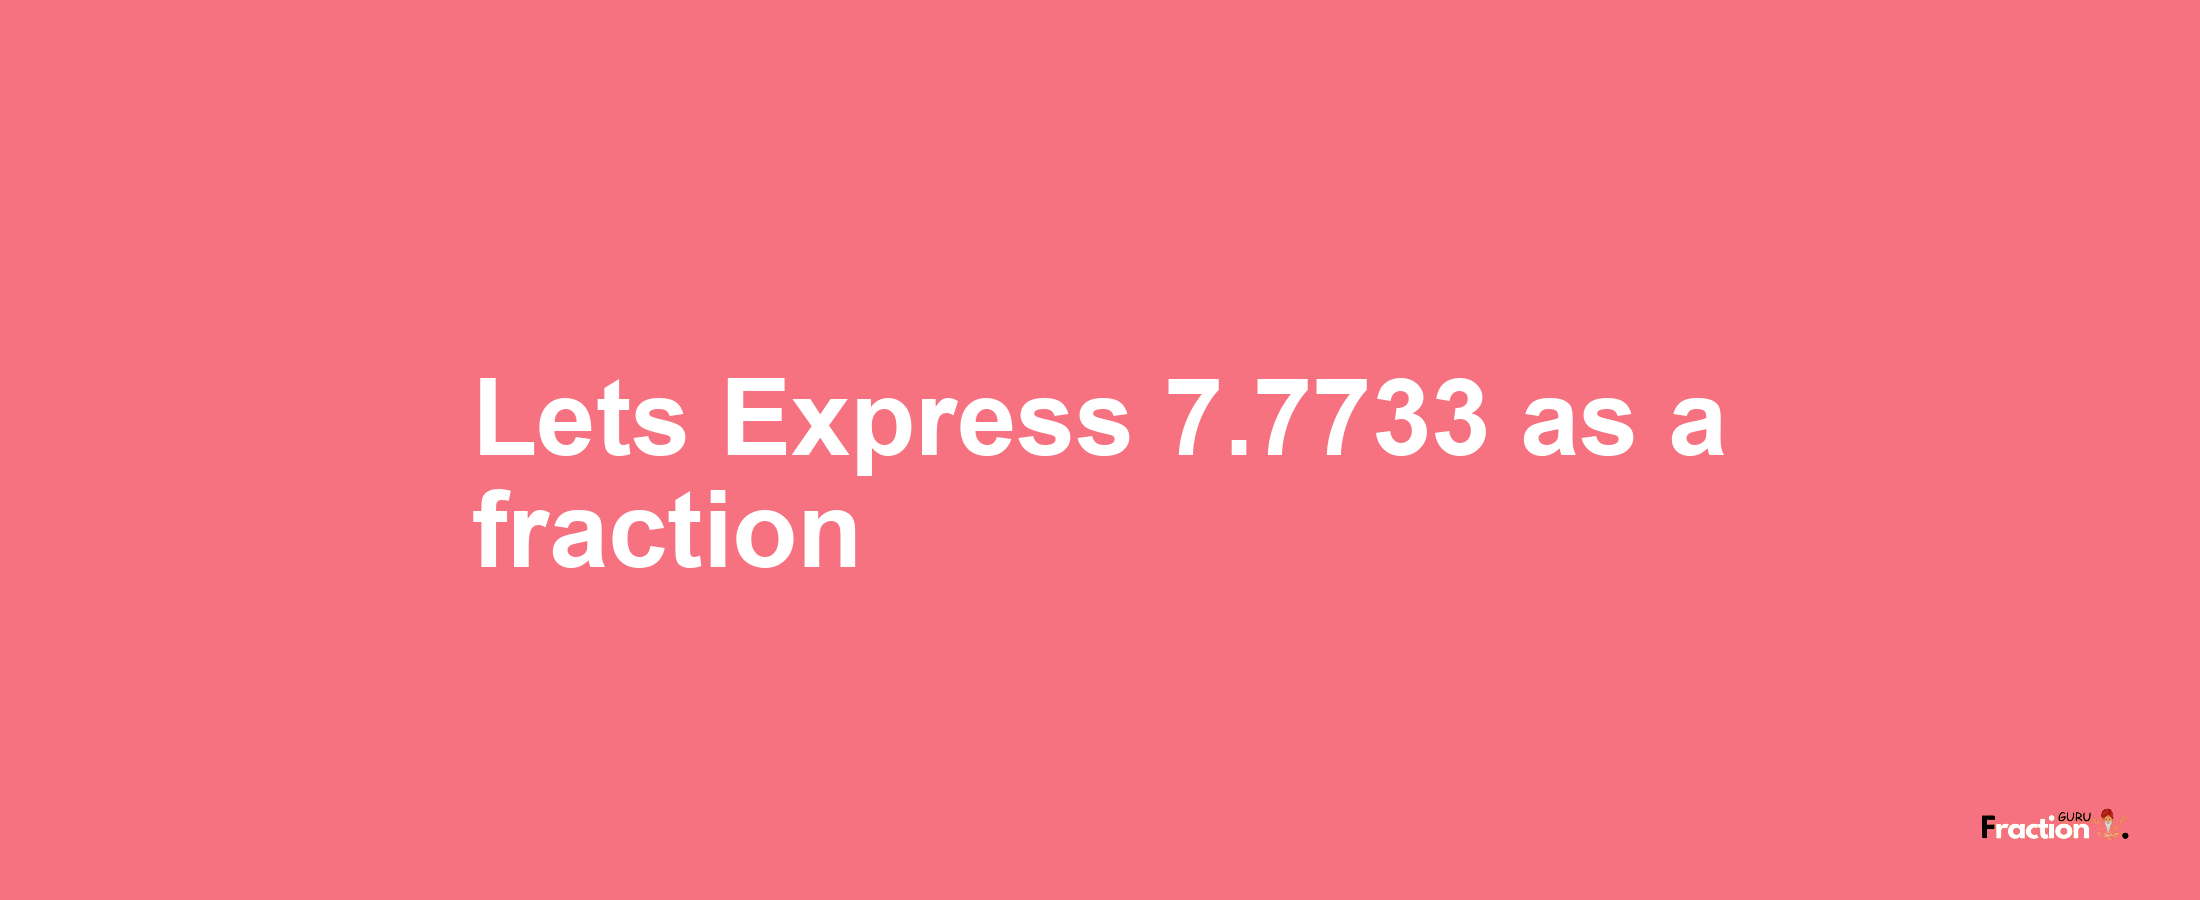 Lets Express 7.7733 as afraction